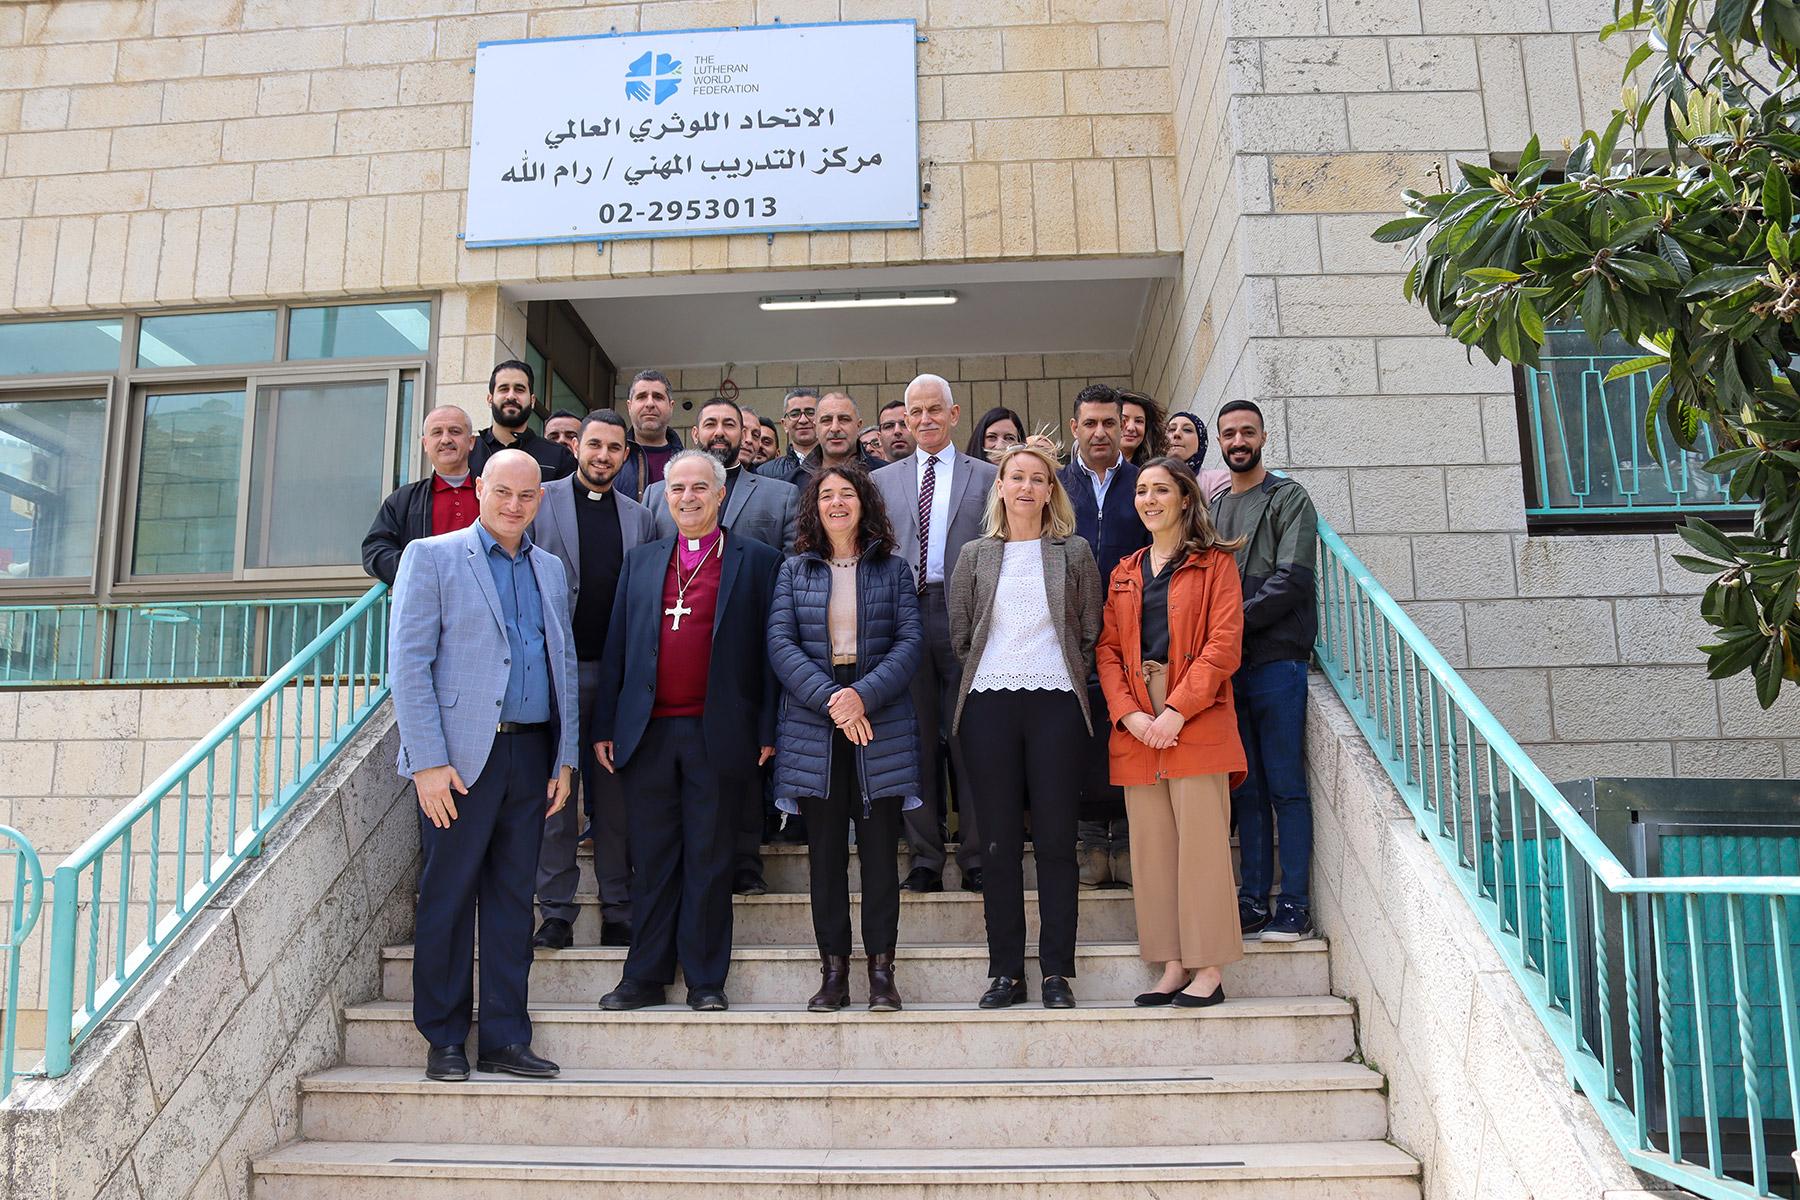 Outside LWF's vocational training center in Ramallah â front row from left, program director Yousef Shalian, Bishop Ibrahim Azar, LWF Representative Sieglinde Weinbrenner, LWF Regional Program Coordinator Caroline Tveoy and Heather Platt from Canadian Lutheran World Relief. The ELCJHLâs director of education Dr Charlie Haddad and the ELCAâs Rev. Gabi Aelabouni are behind them. All photos: Abd Al Rahman Hadidi